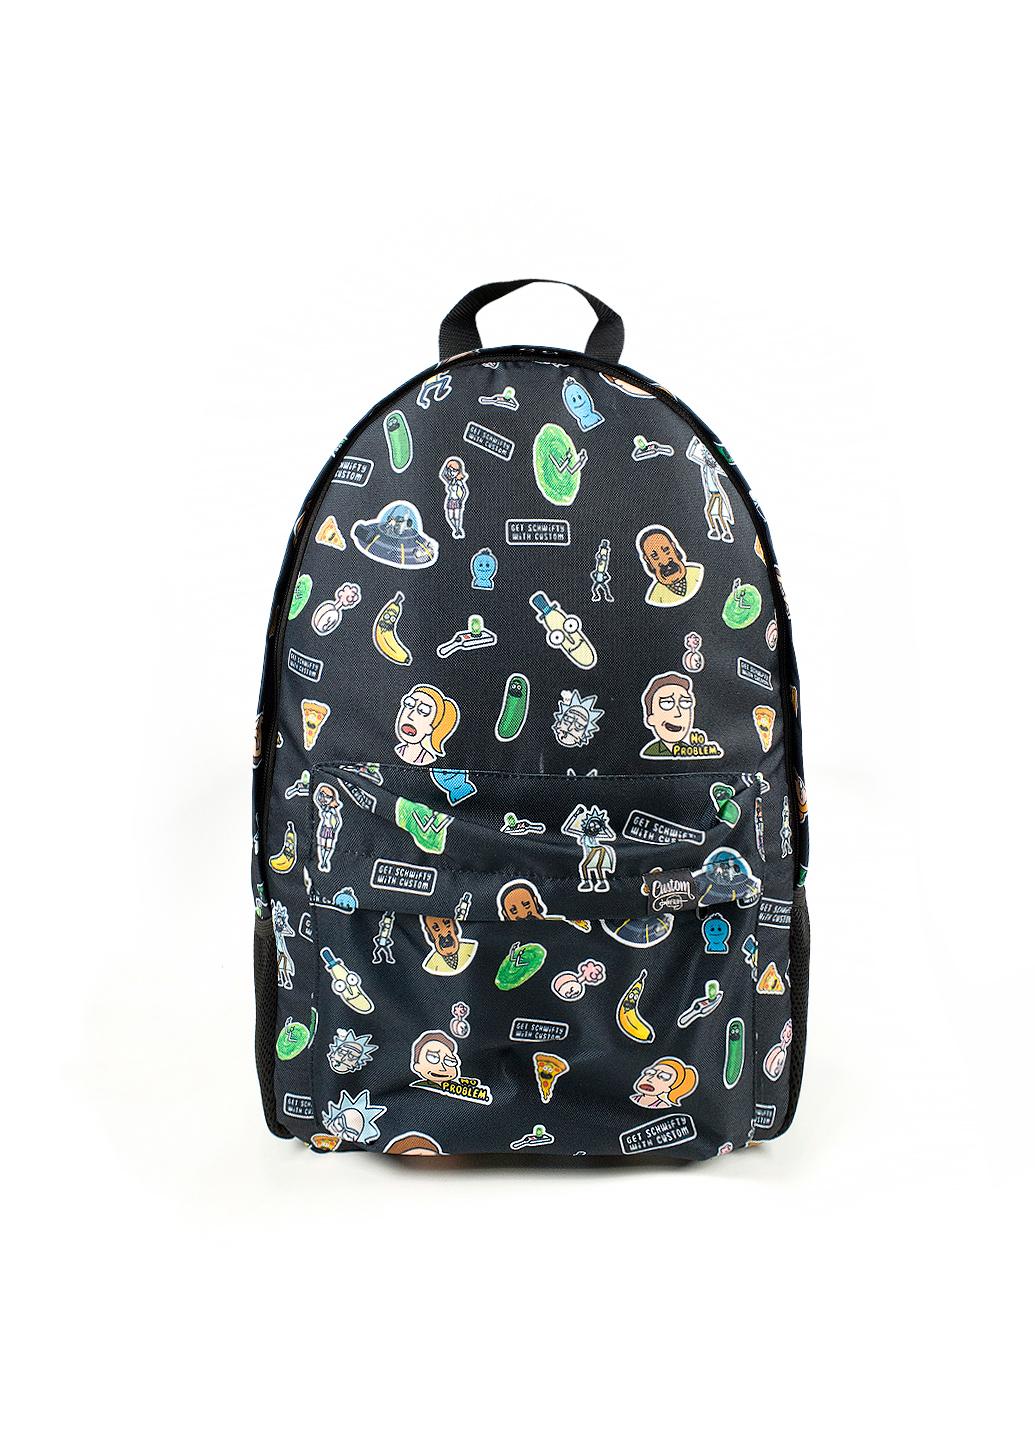 Backpack Custom Wear Duo 2.0 Rick and Morty